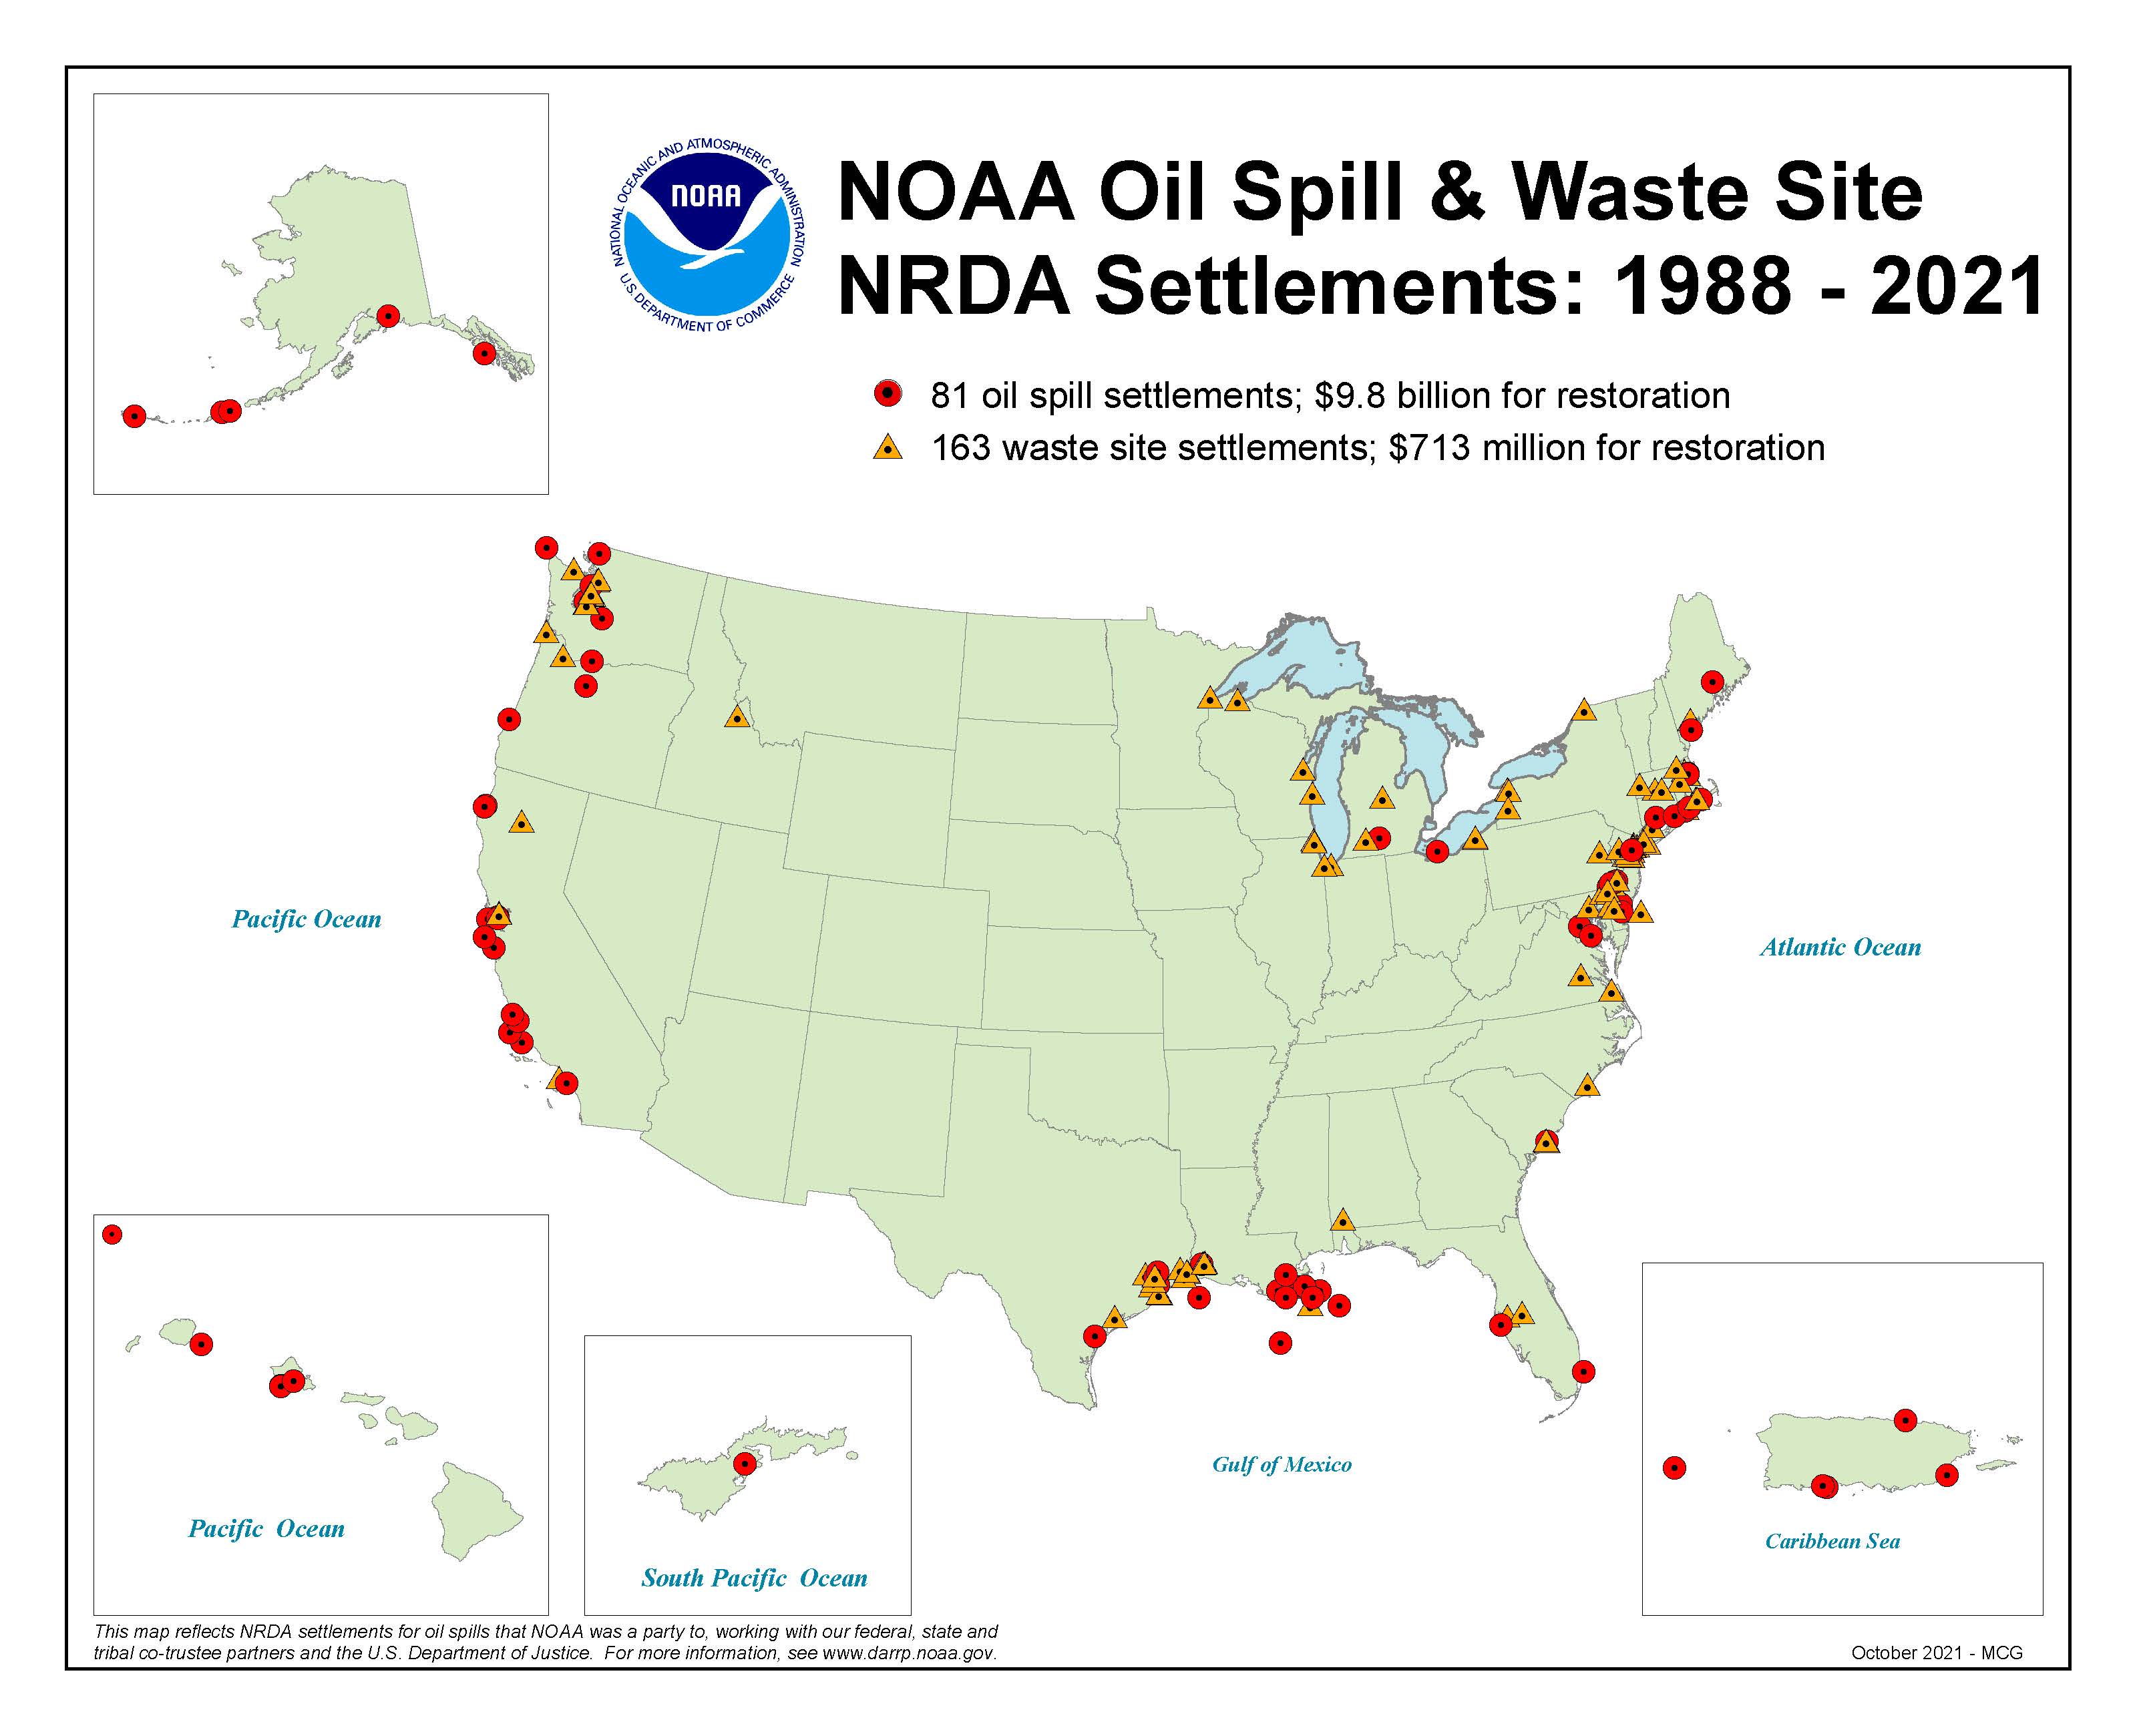 A map of the U.S. showing oil and waste sites.